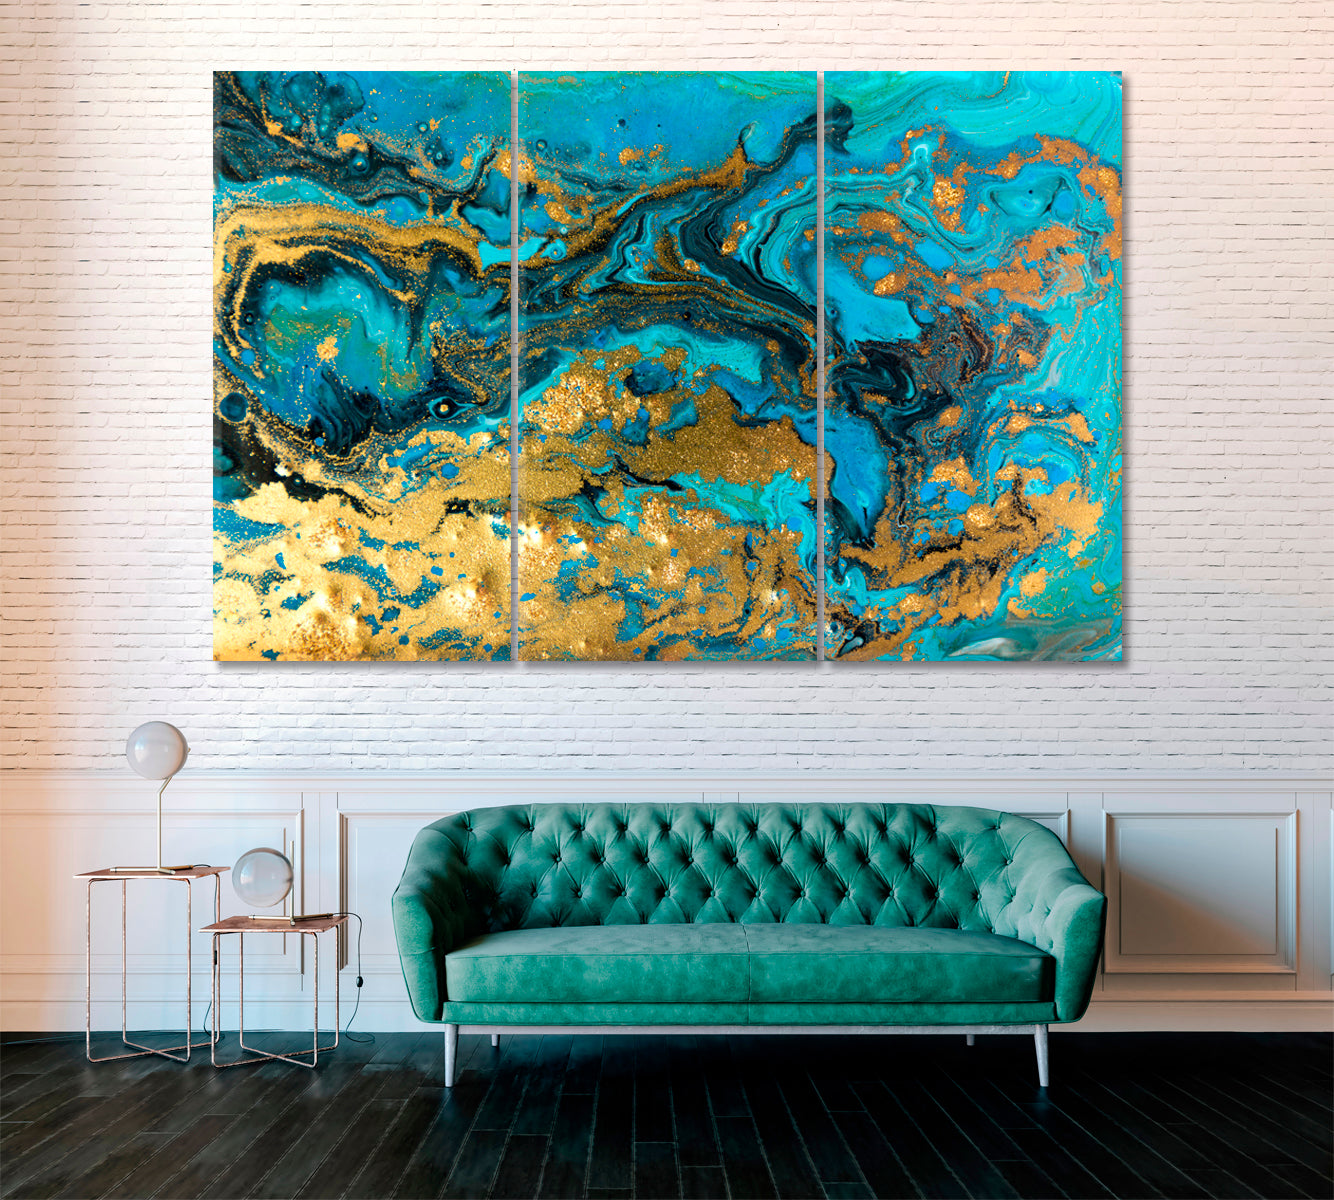 Blue and Gold Marbling Pattern Canvas Print ArtLexy 3 Panels 36"x24" inches 